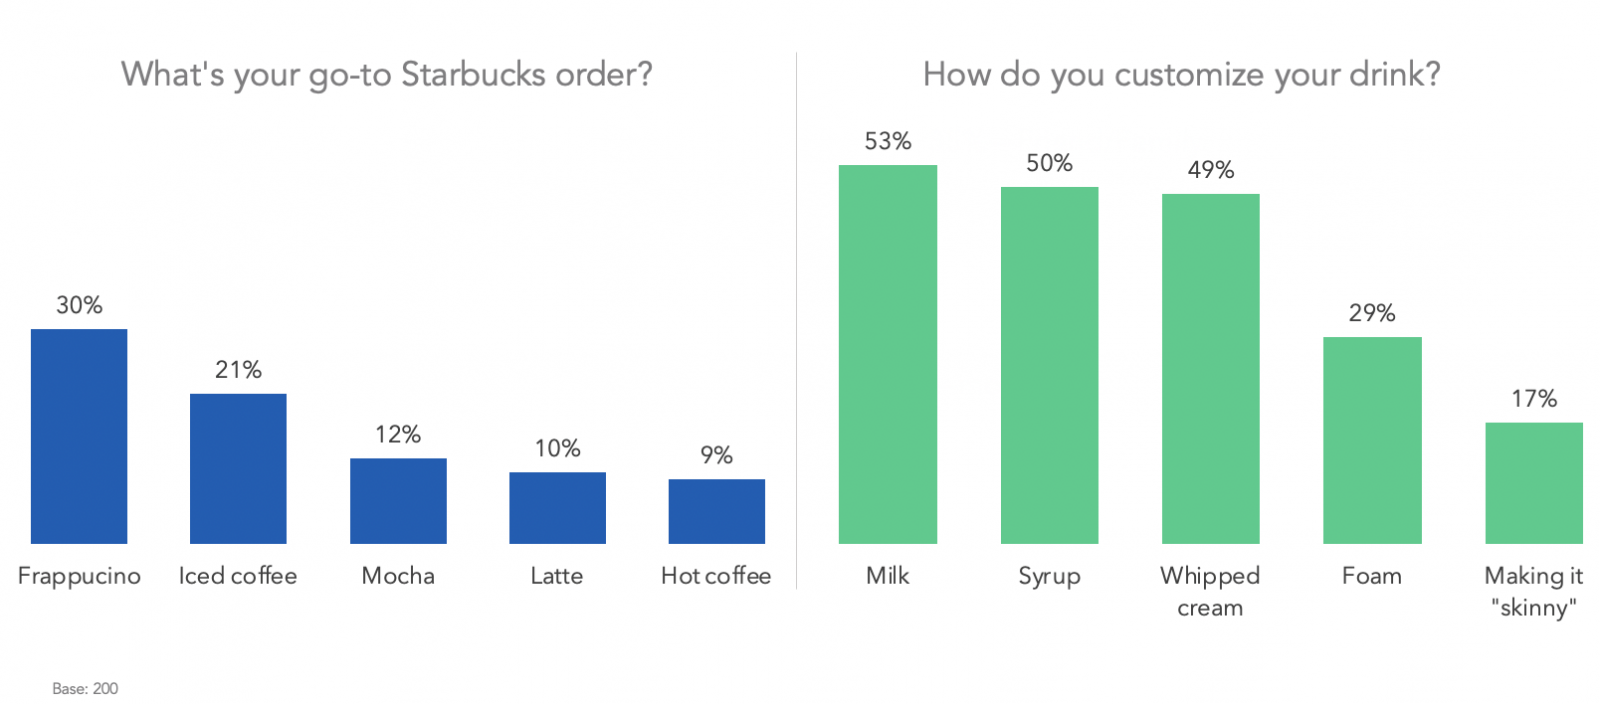 What's your go-to Starbucks order?